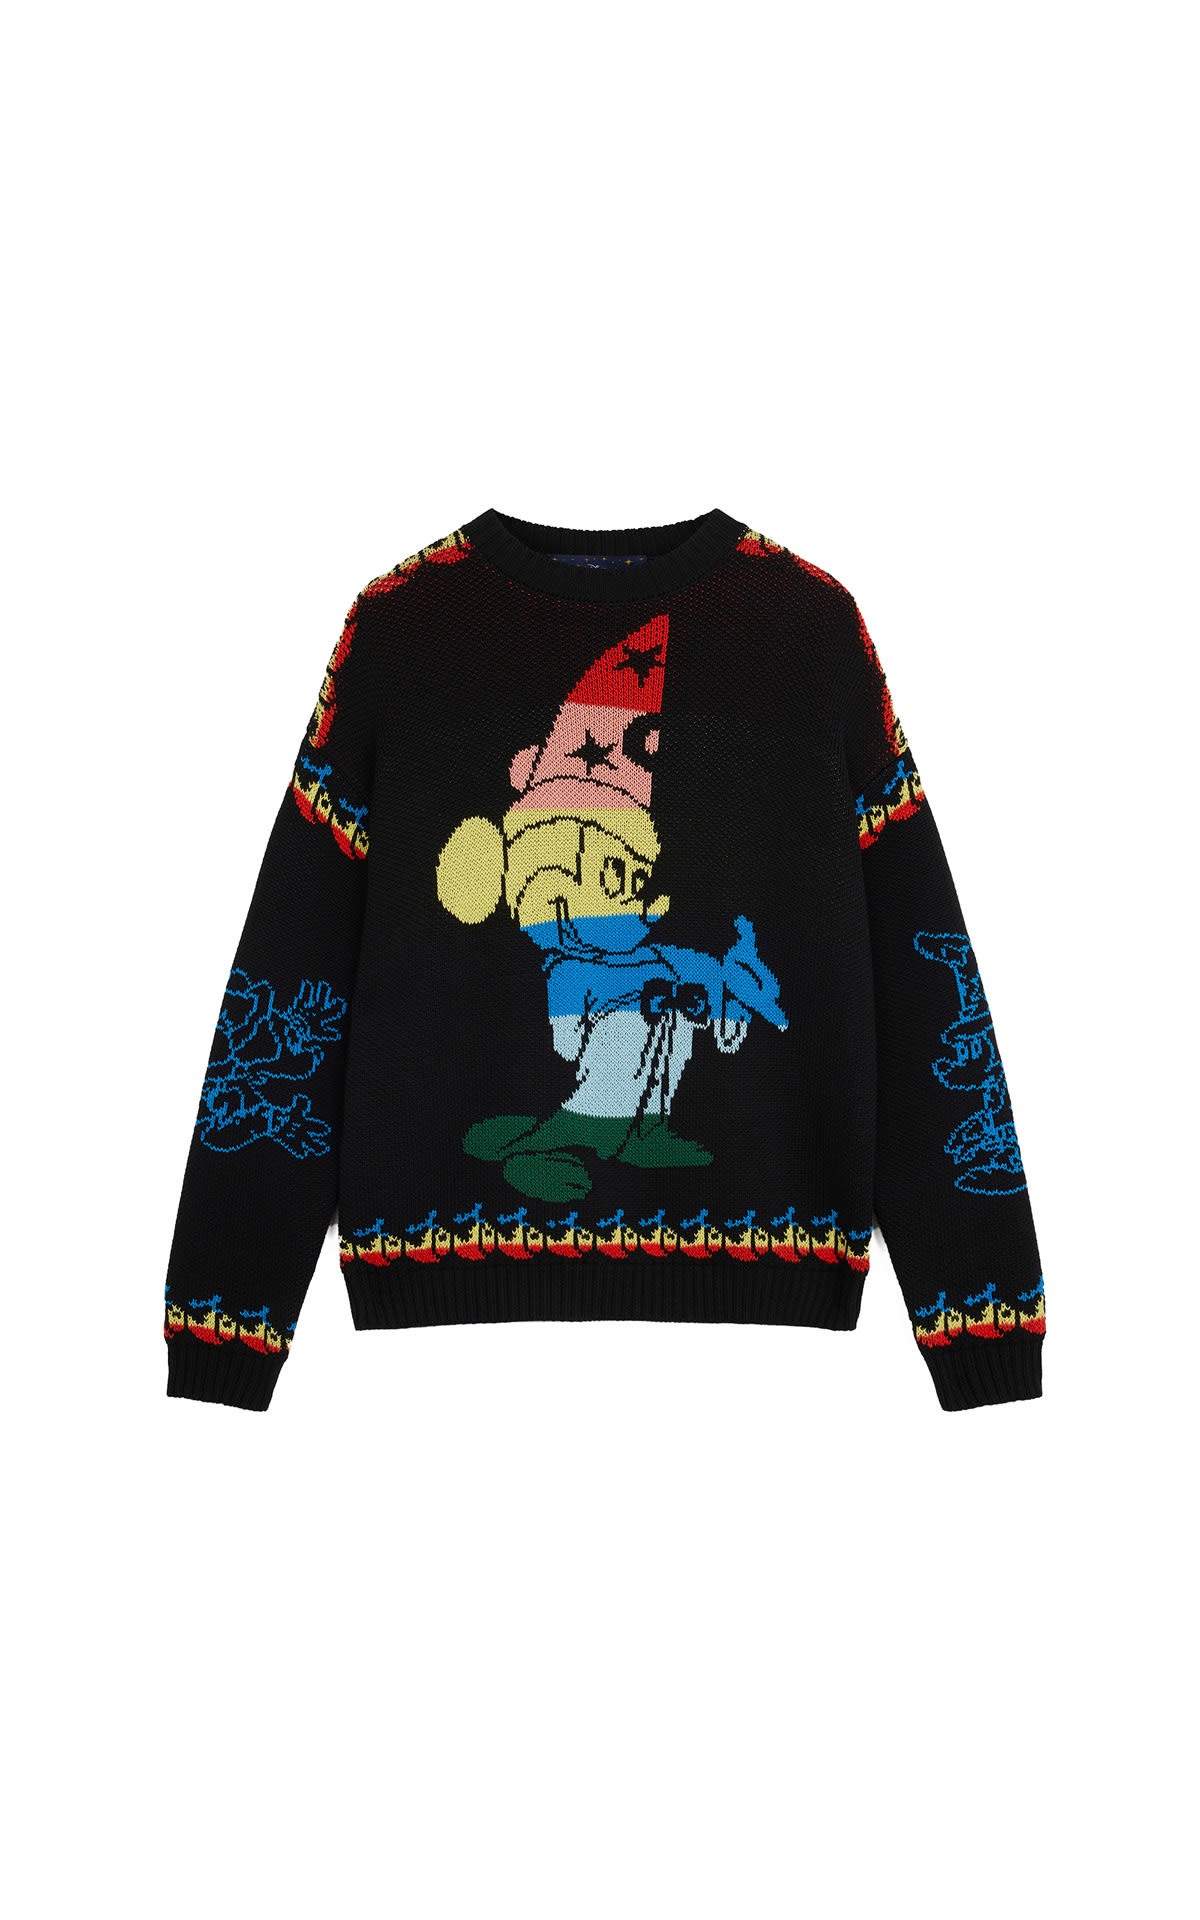 Sweater with print for Disney Fantasia of Mickey Mouse Stella McCartney